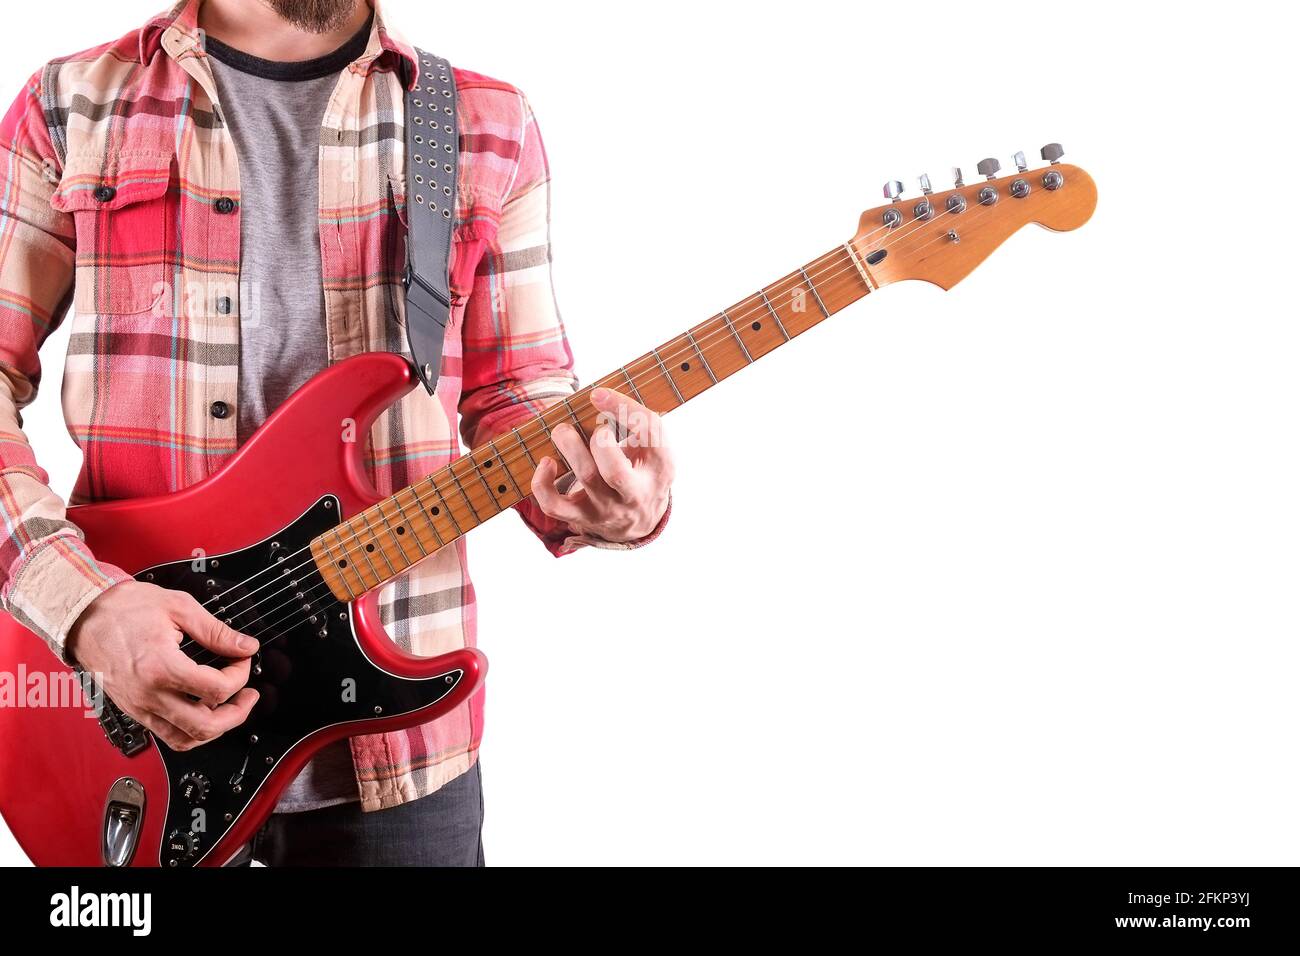 Rock guitarist in checkered plaid shirt playing candy apple red electric guitar w/ single coil, maple neck & black pickguard. Man holding musical inst Stock Photo